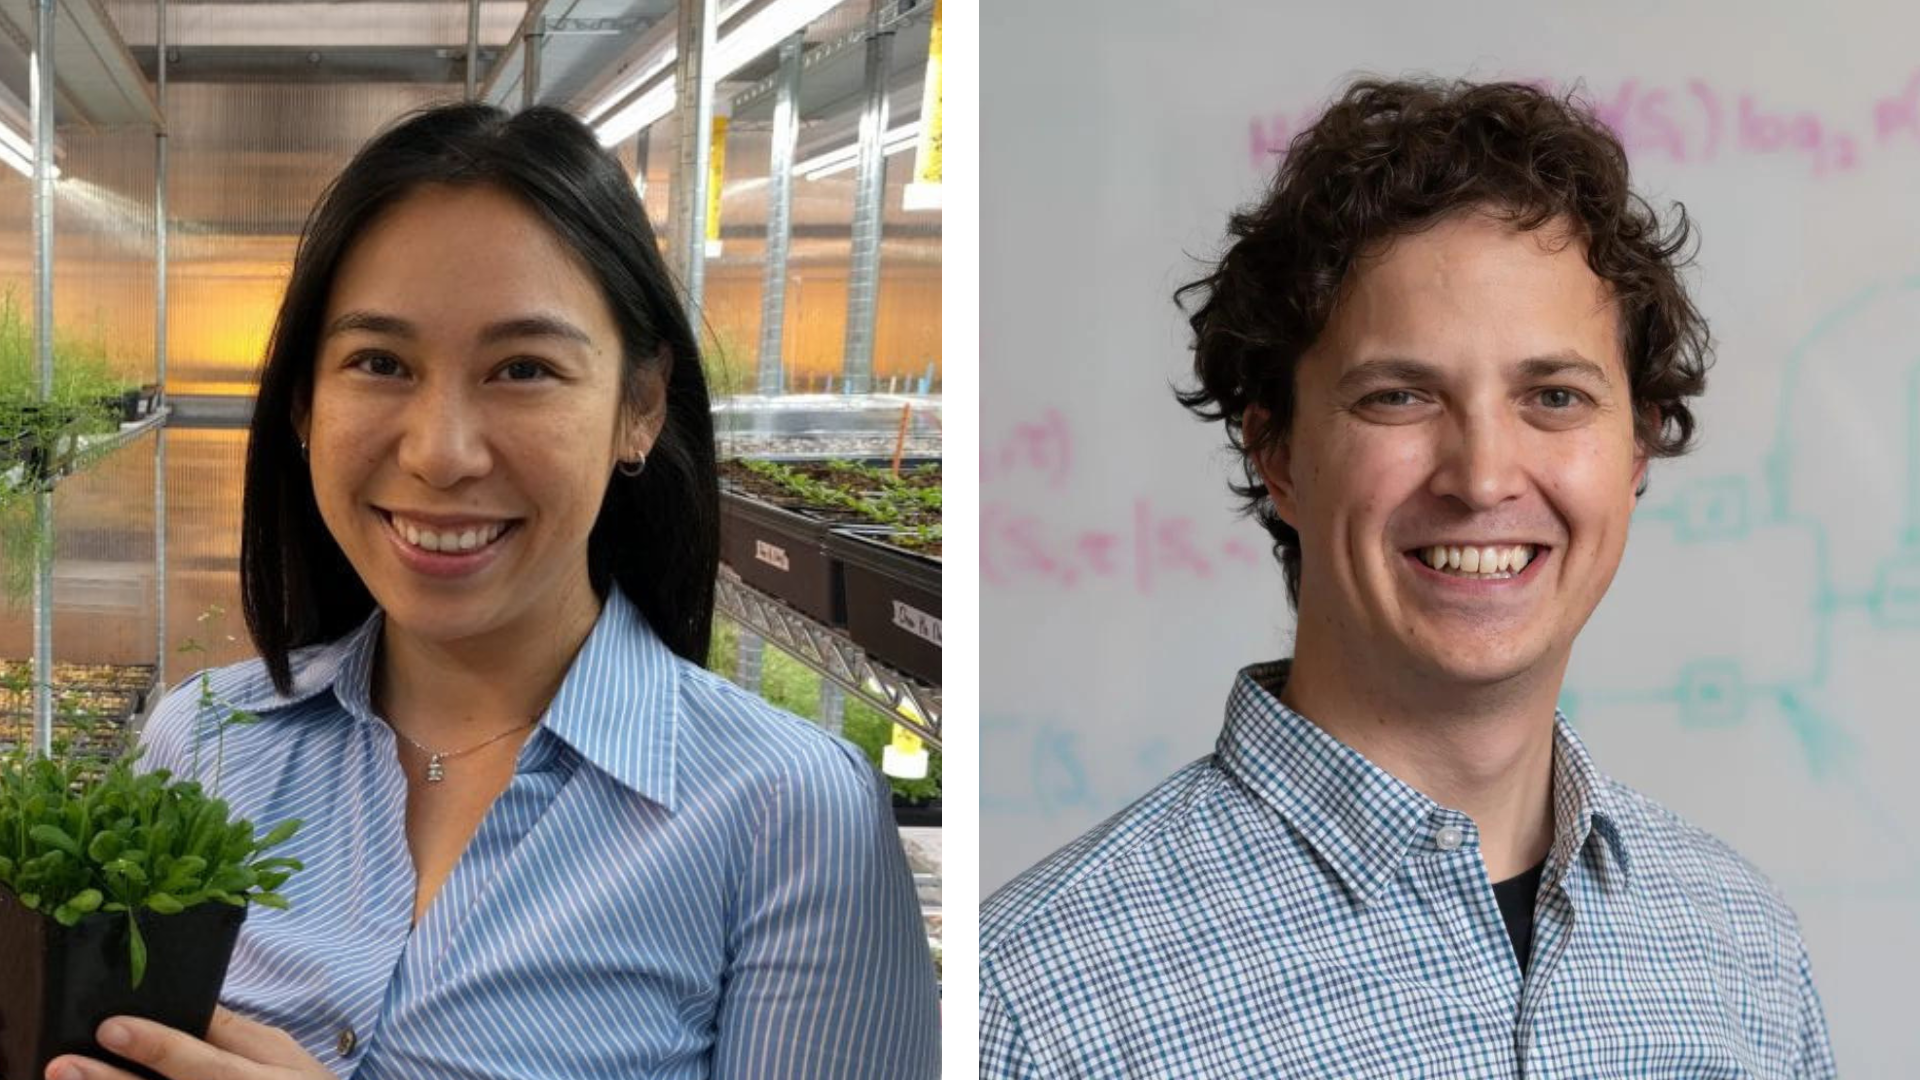 Two side-by-side portraits of Lily Cheung (Left) and Simon Sponberg (Right)